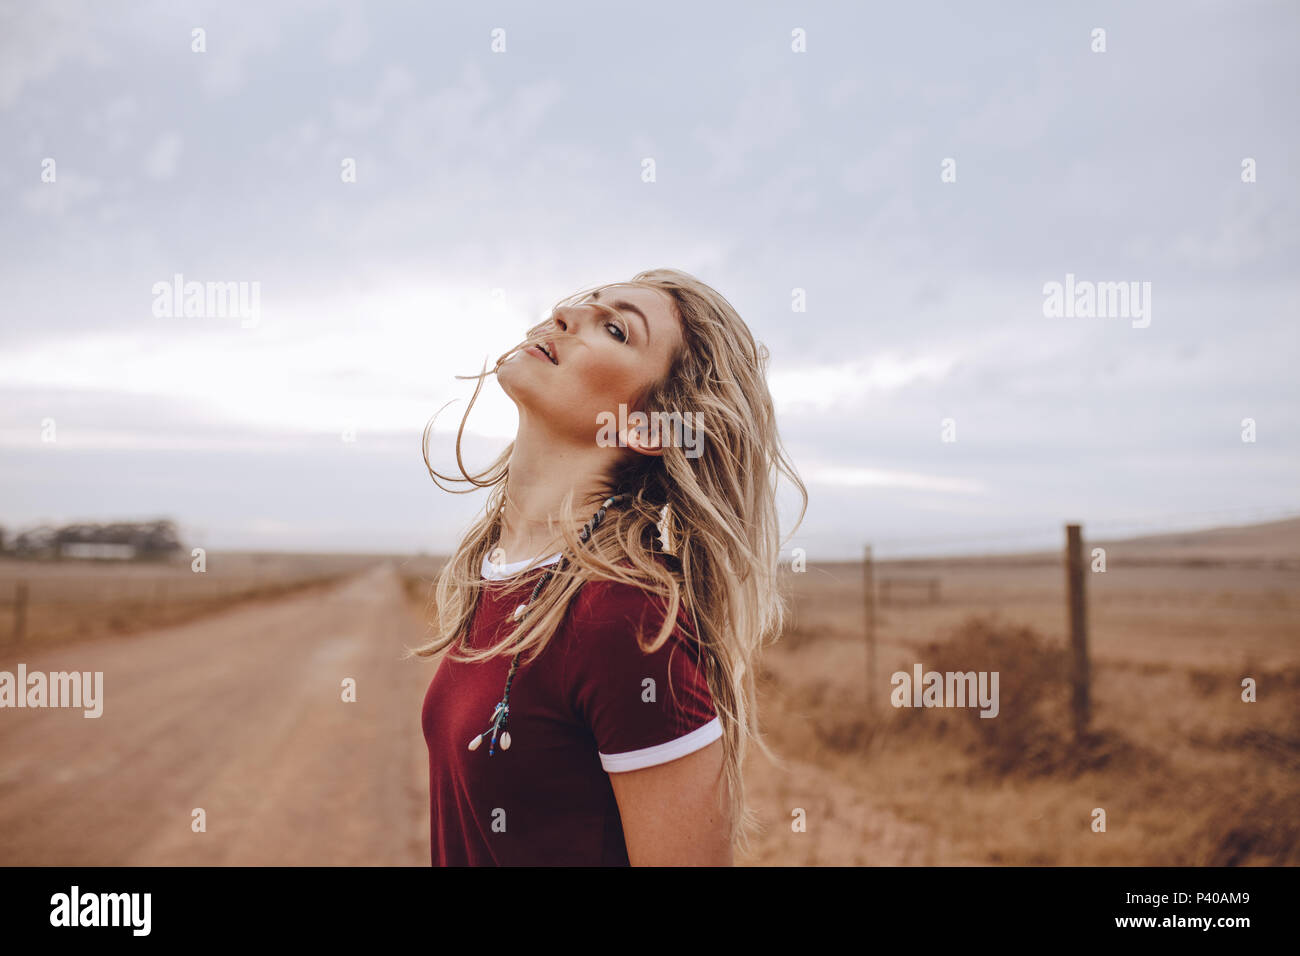 Attractive woman standing on country road. Female with blond hair standing outdoors in countryside. Stock Photo